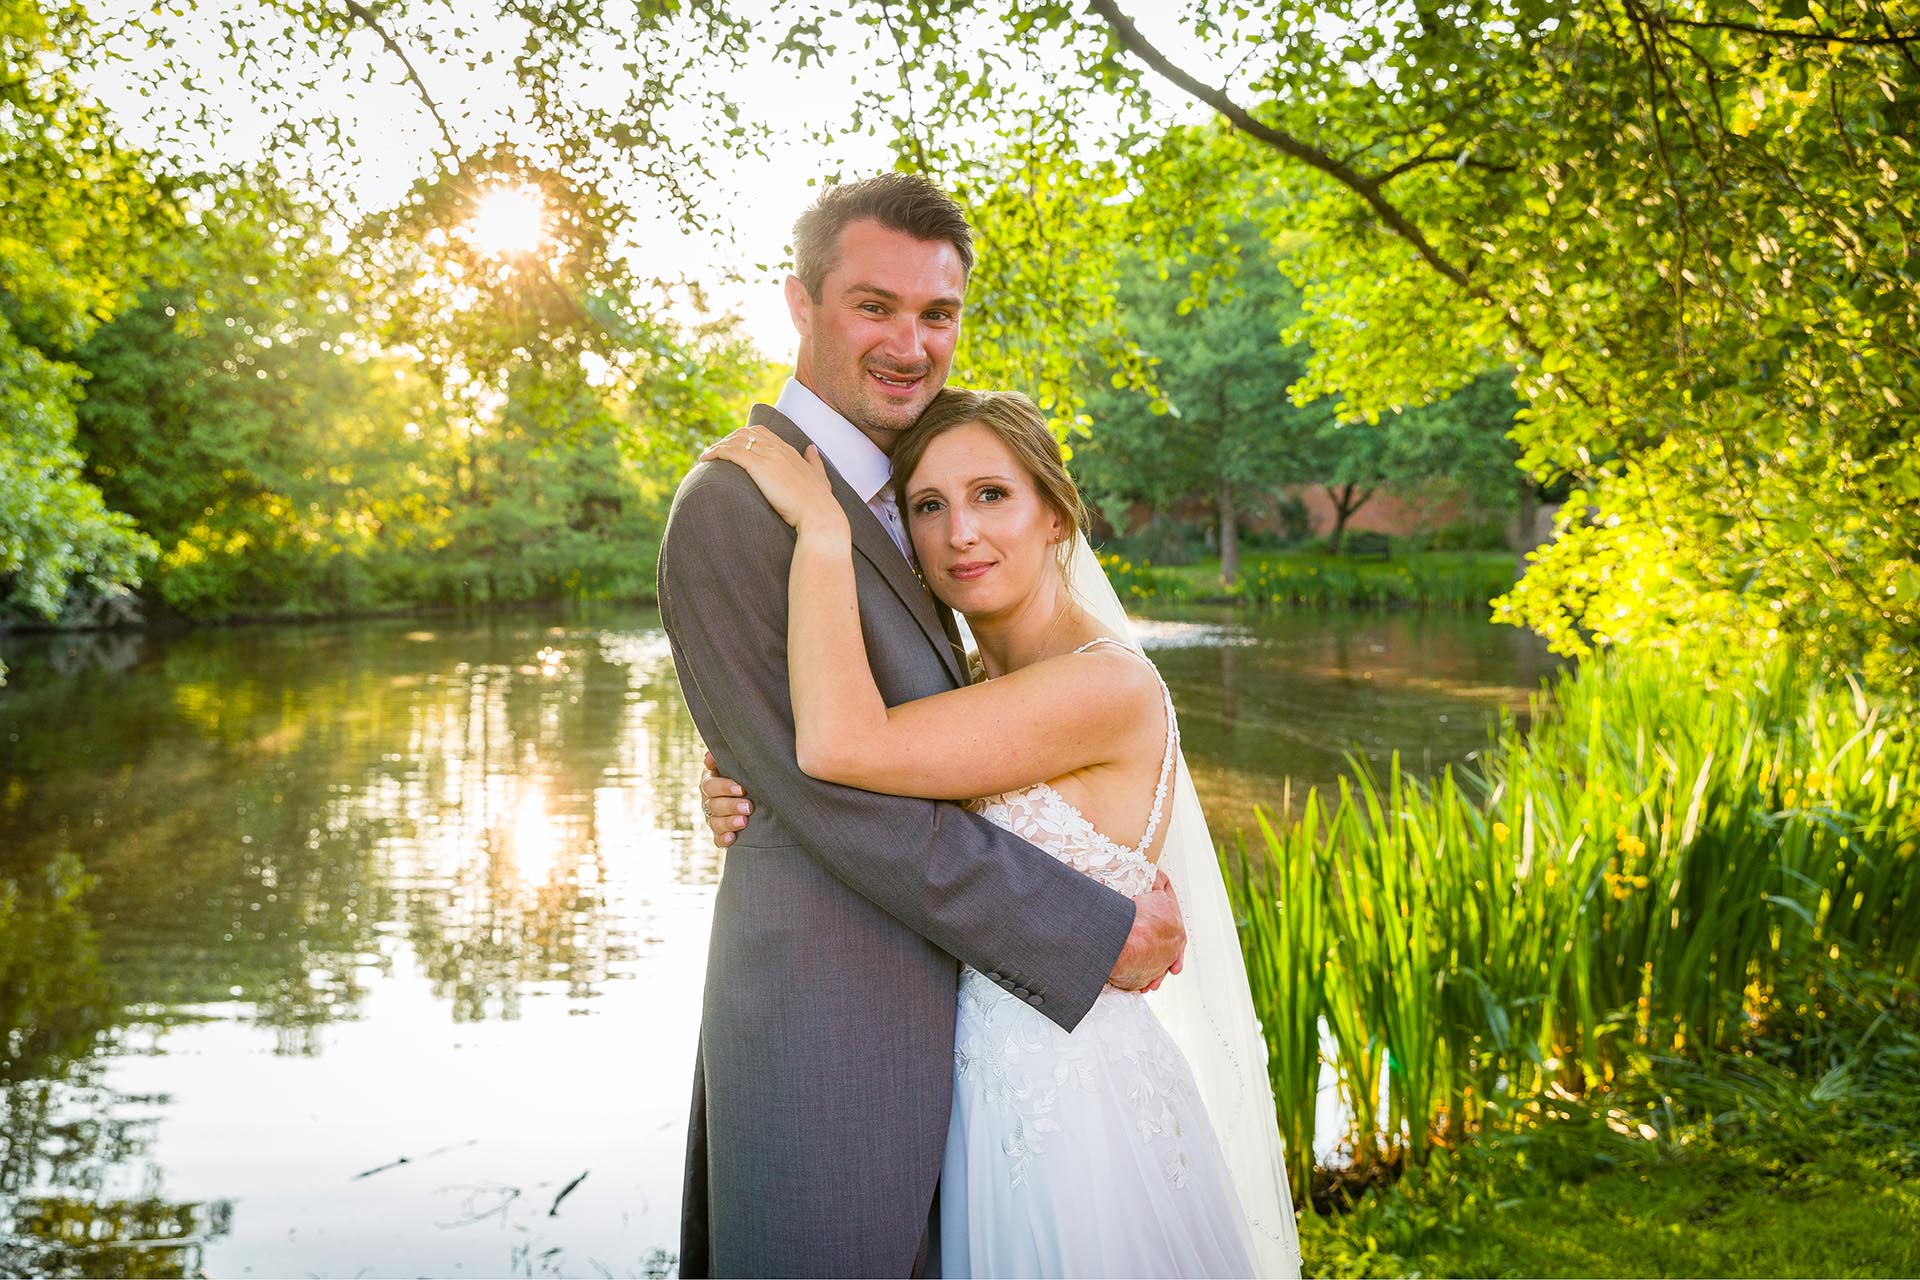 Bride and groom golden light photograph at Leez Priory, Great Leighs, Chelmsford, Essex